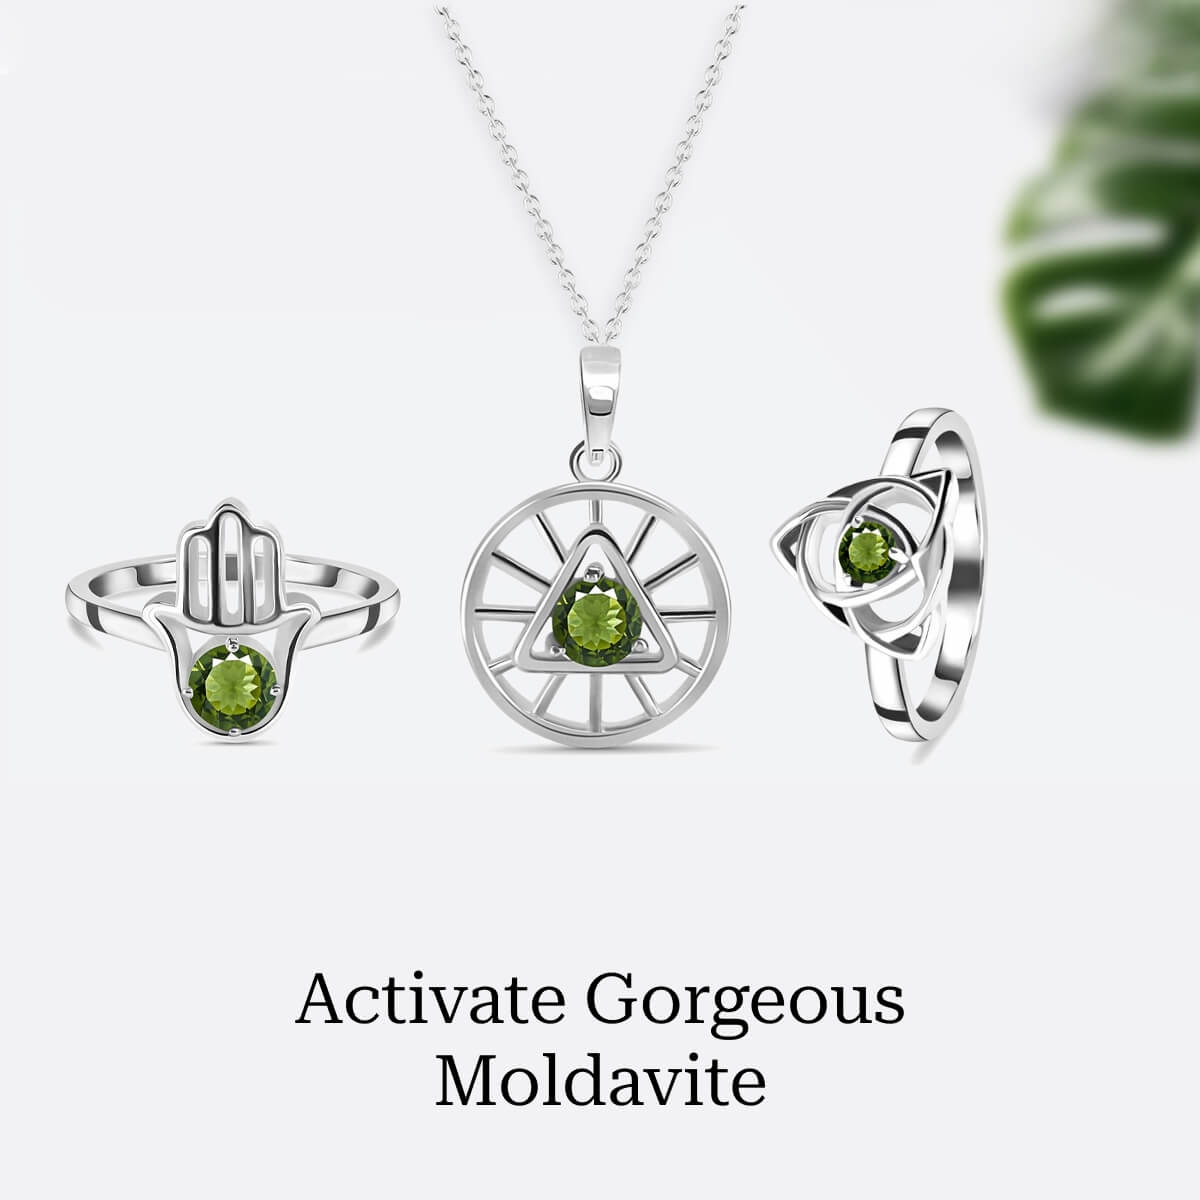 How To Activate Your Moldavite